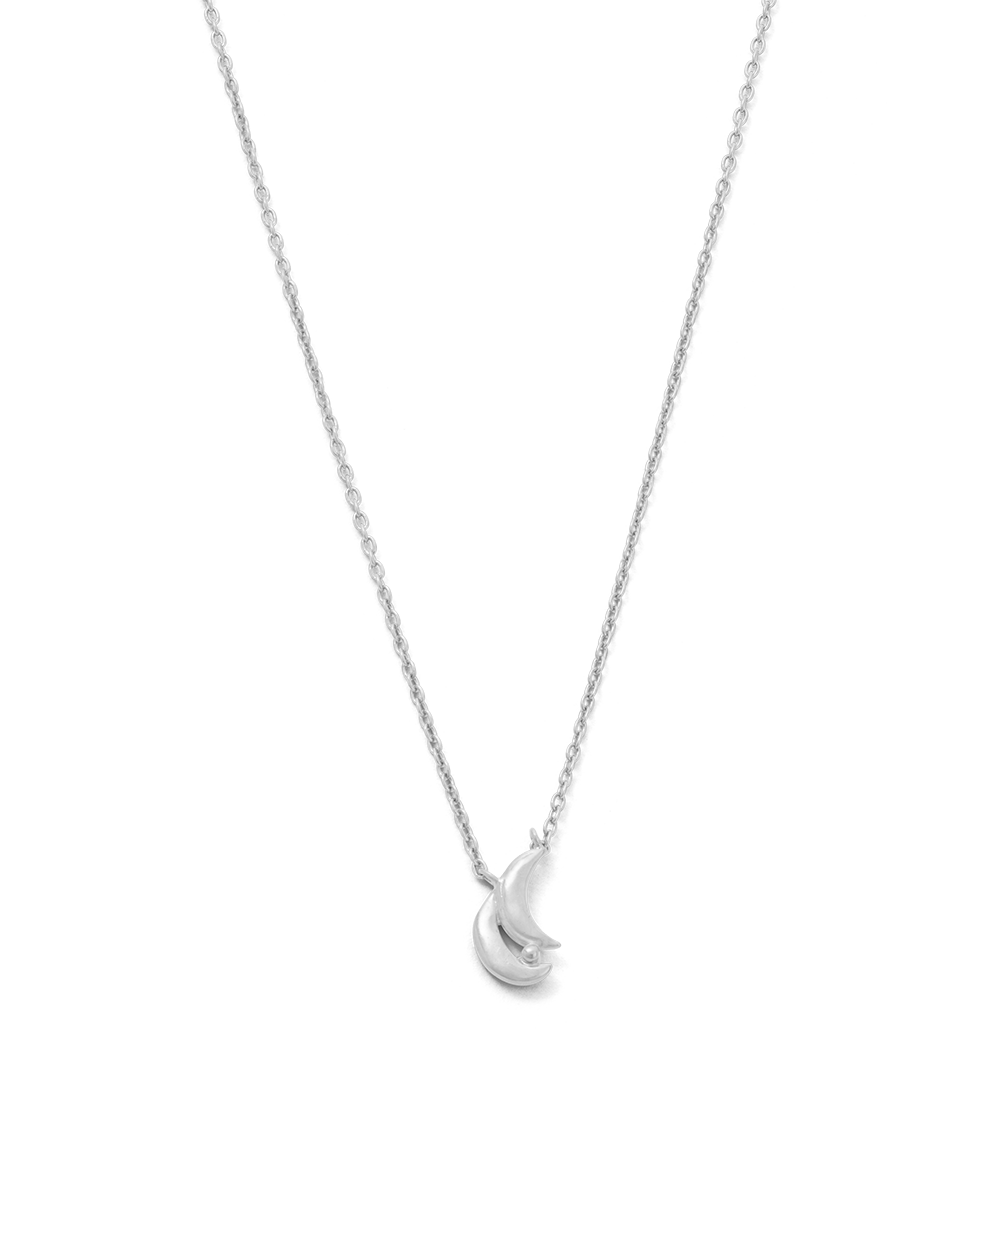 GEMINI STAR SIGN NECKLACE (STERLING SILVER)